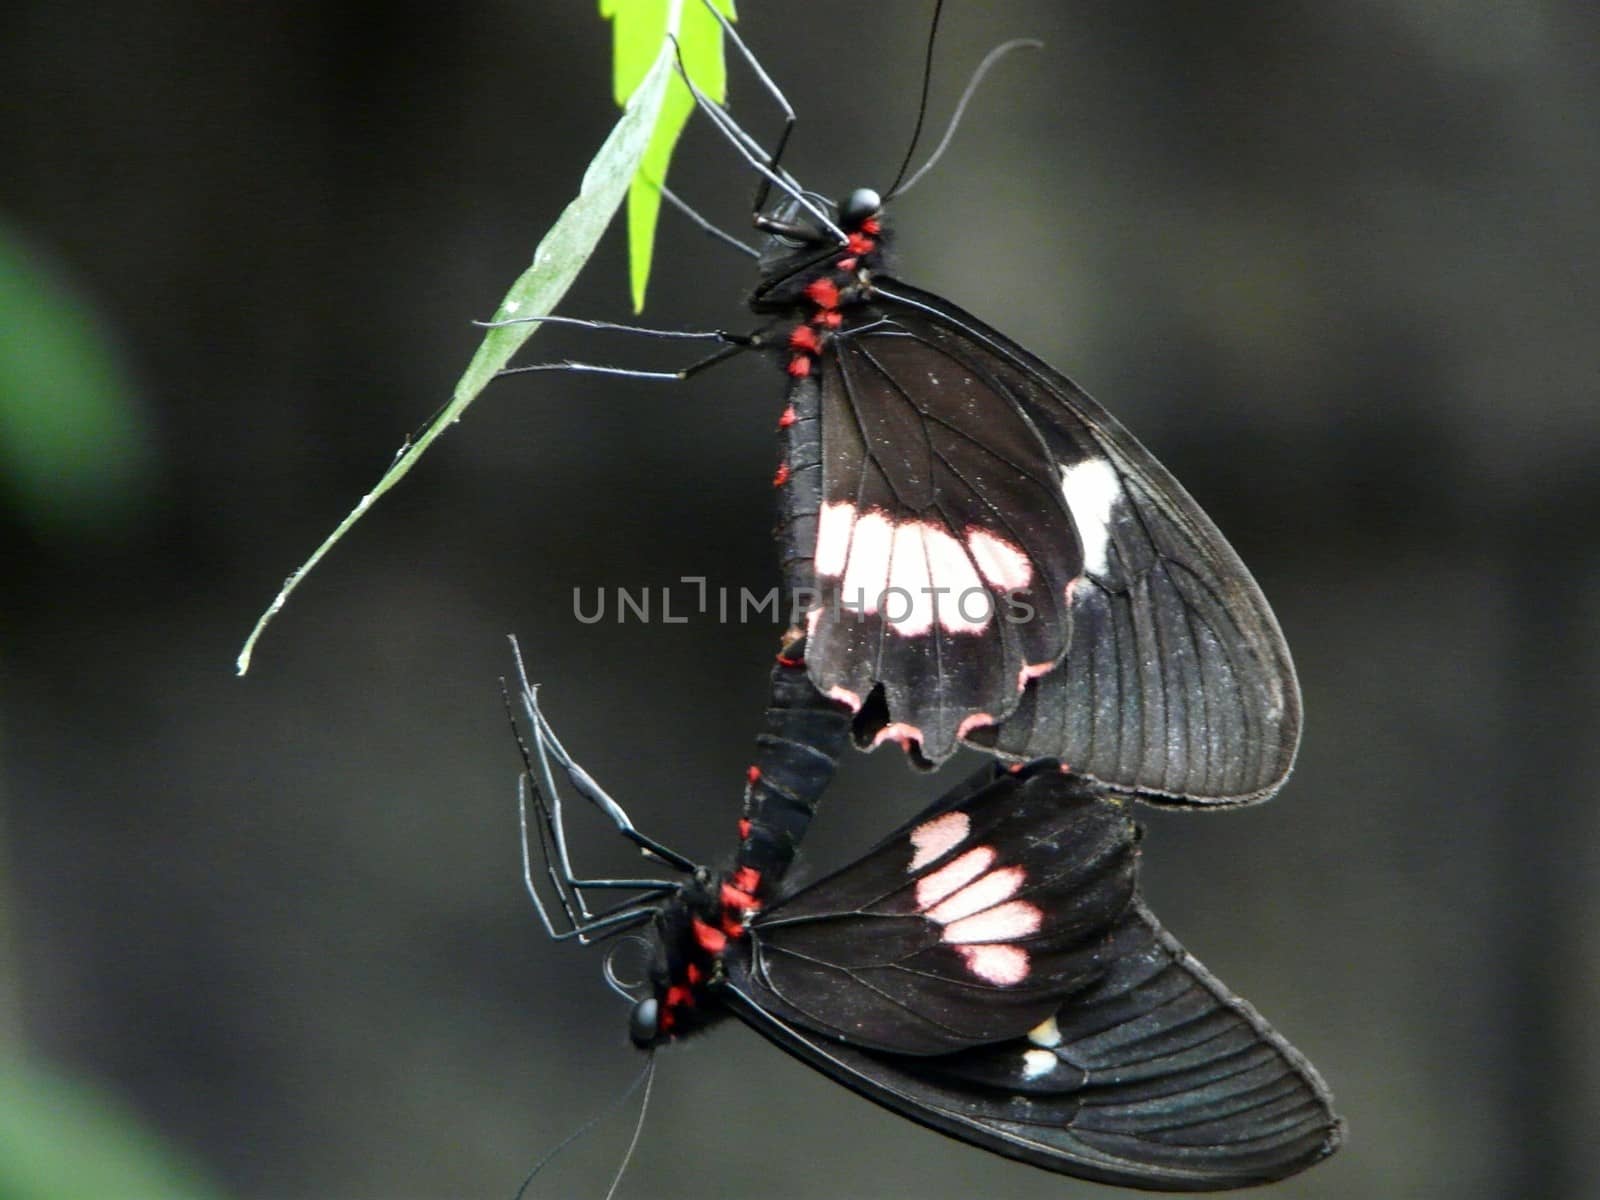 Doris Longwing Butterfly (Heliconius doris) Native to the tropical rainforest of Costa Rica